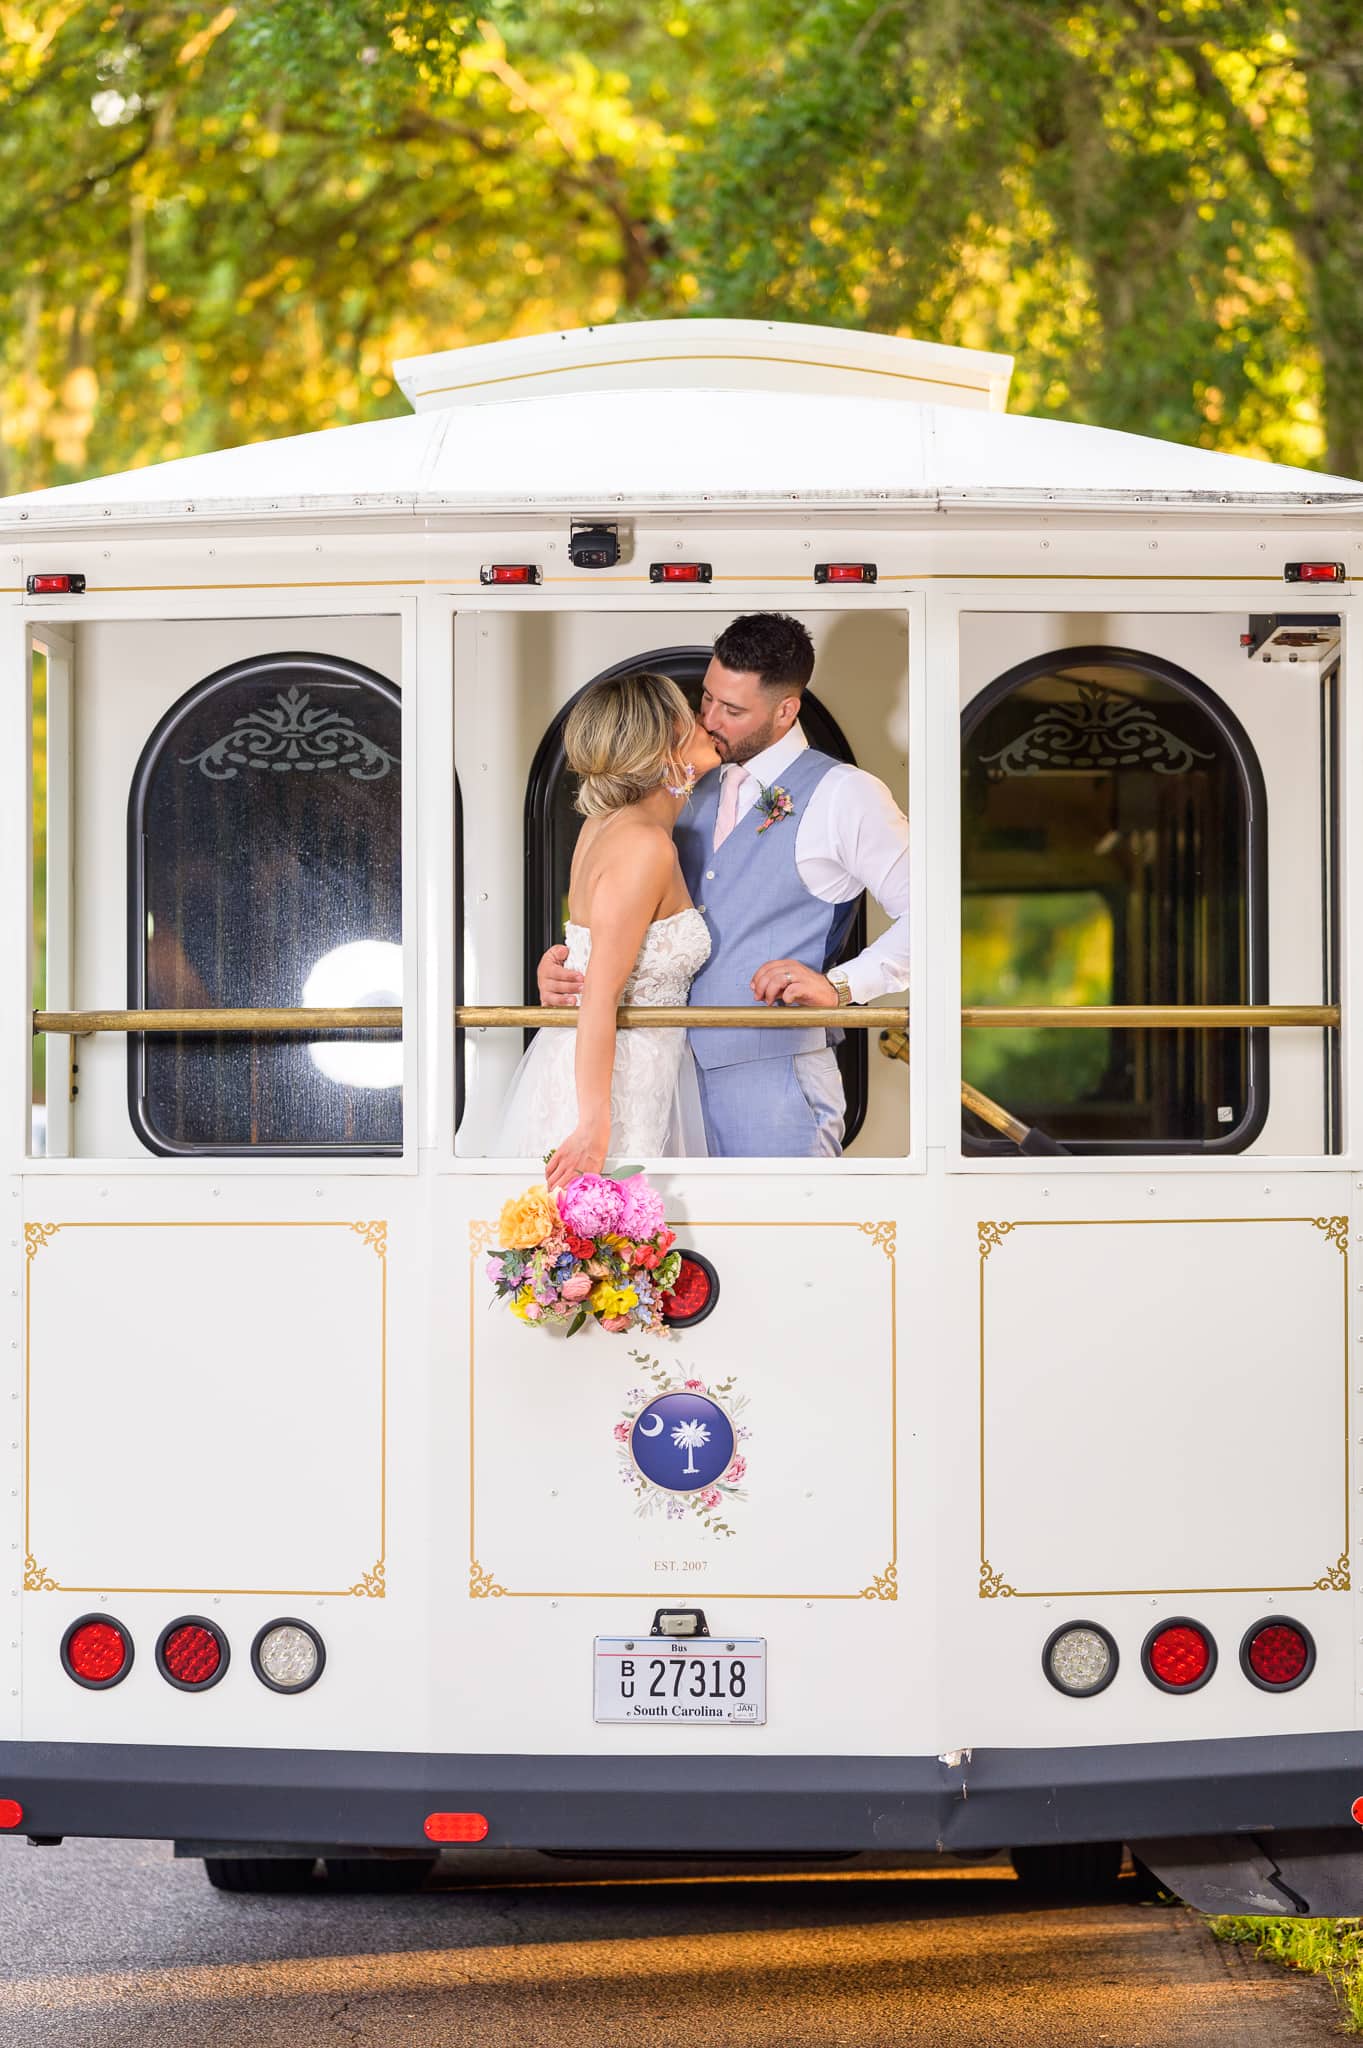 Portraits of the bride and groom with the white trolly - Pawleys Plantation Golf & Country Club